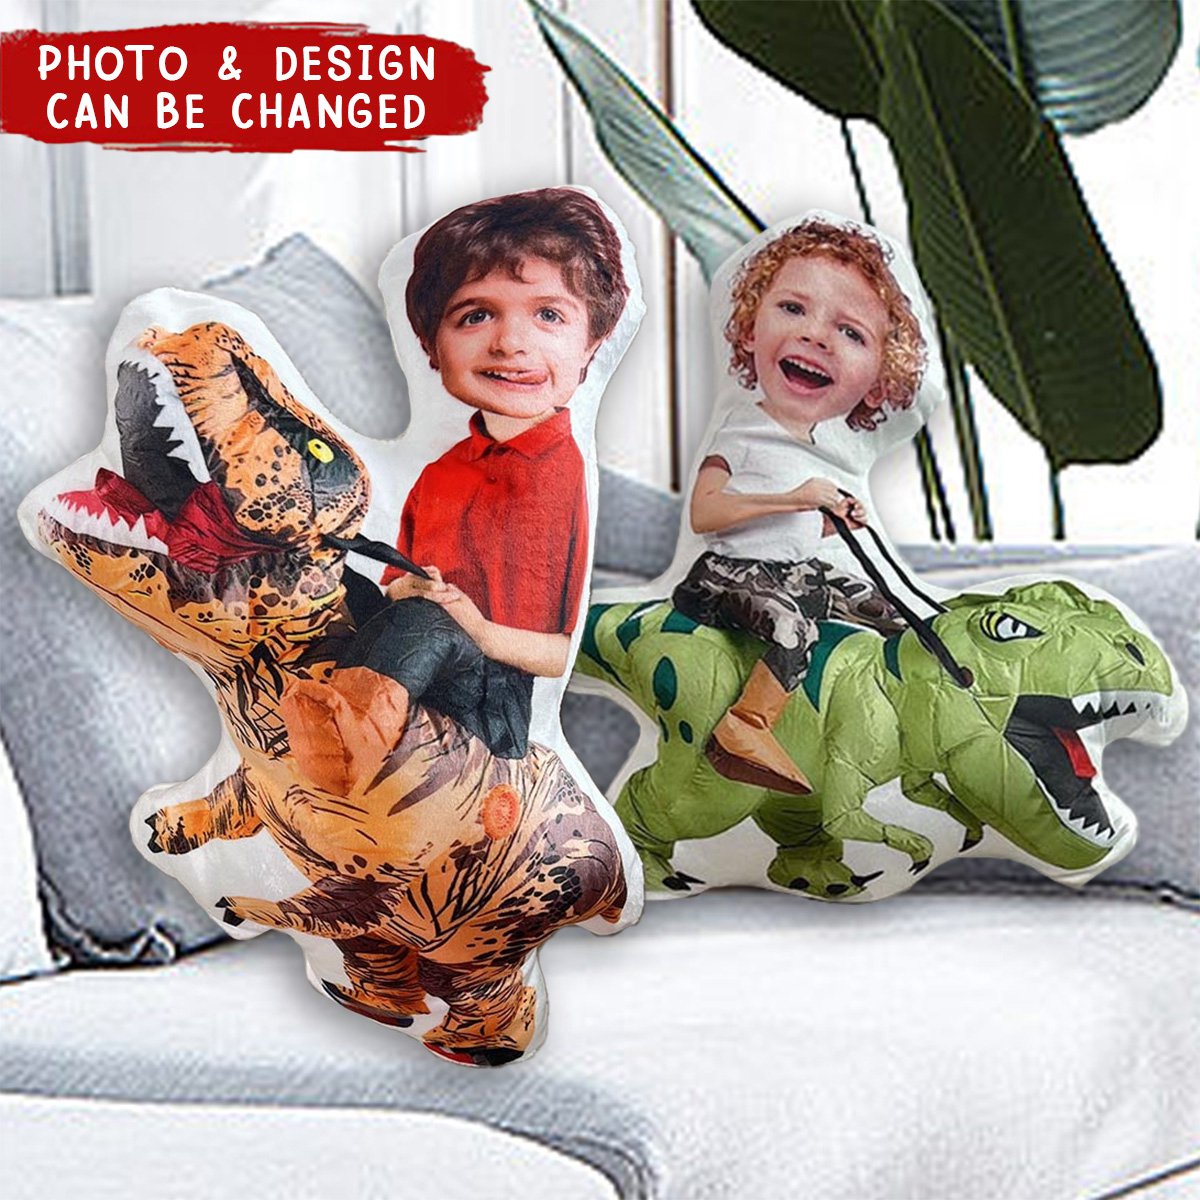 Kids Riding Dinosaur For Sons, Daughters - Personalized Photo Custom Shaped Pillow